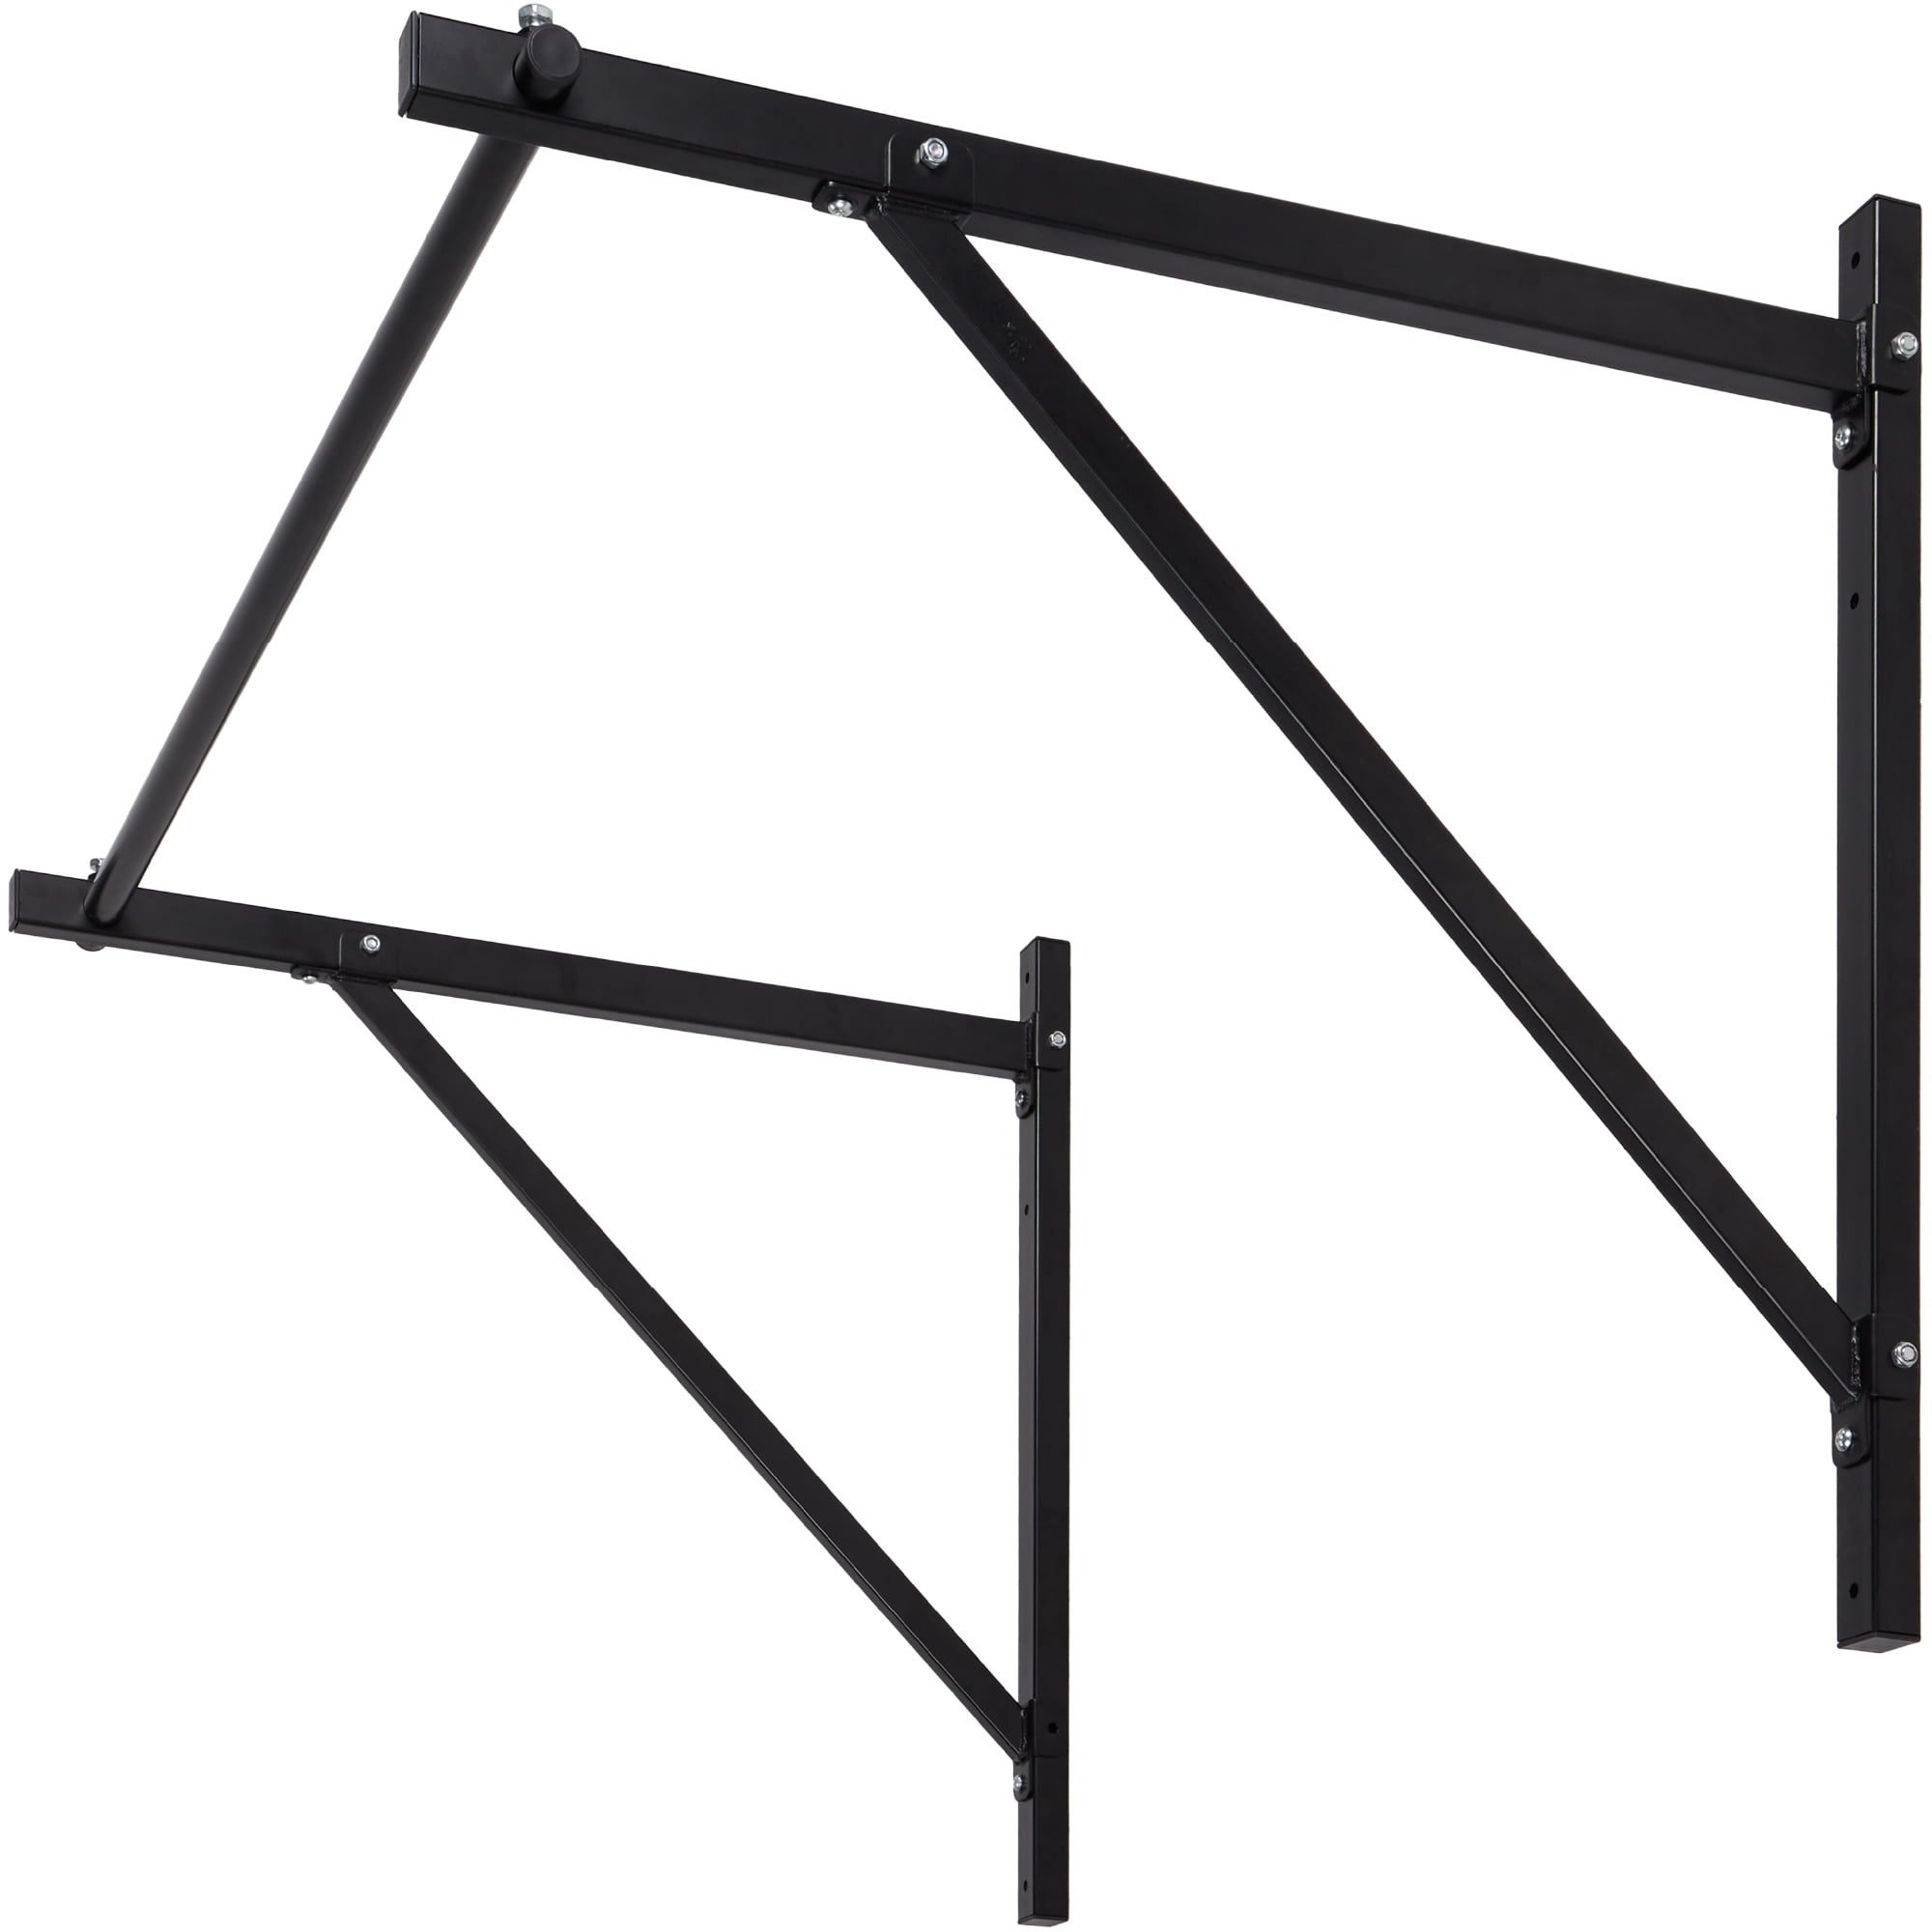 Black Heavy Duty Chin Pull Up Bar Wall Mounted Exercise Workout Home Fitness Gym 